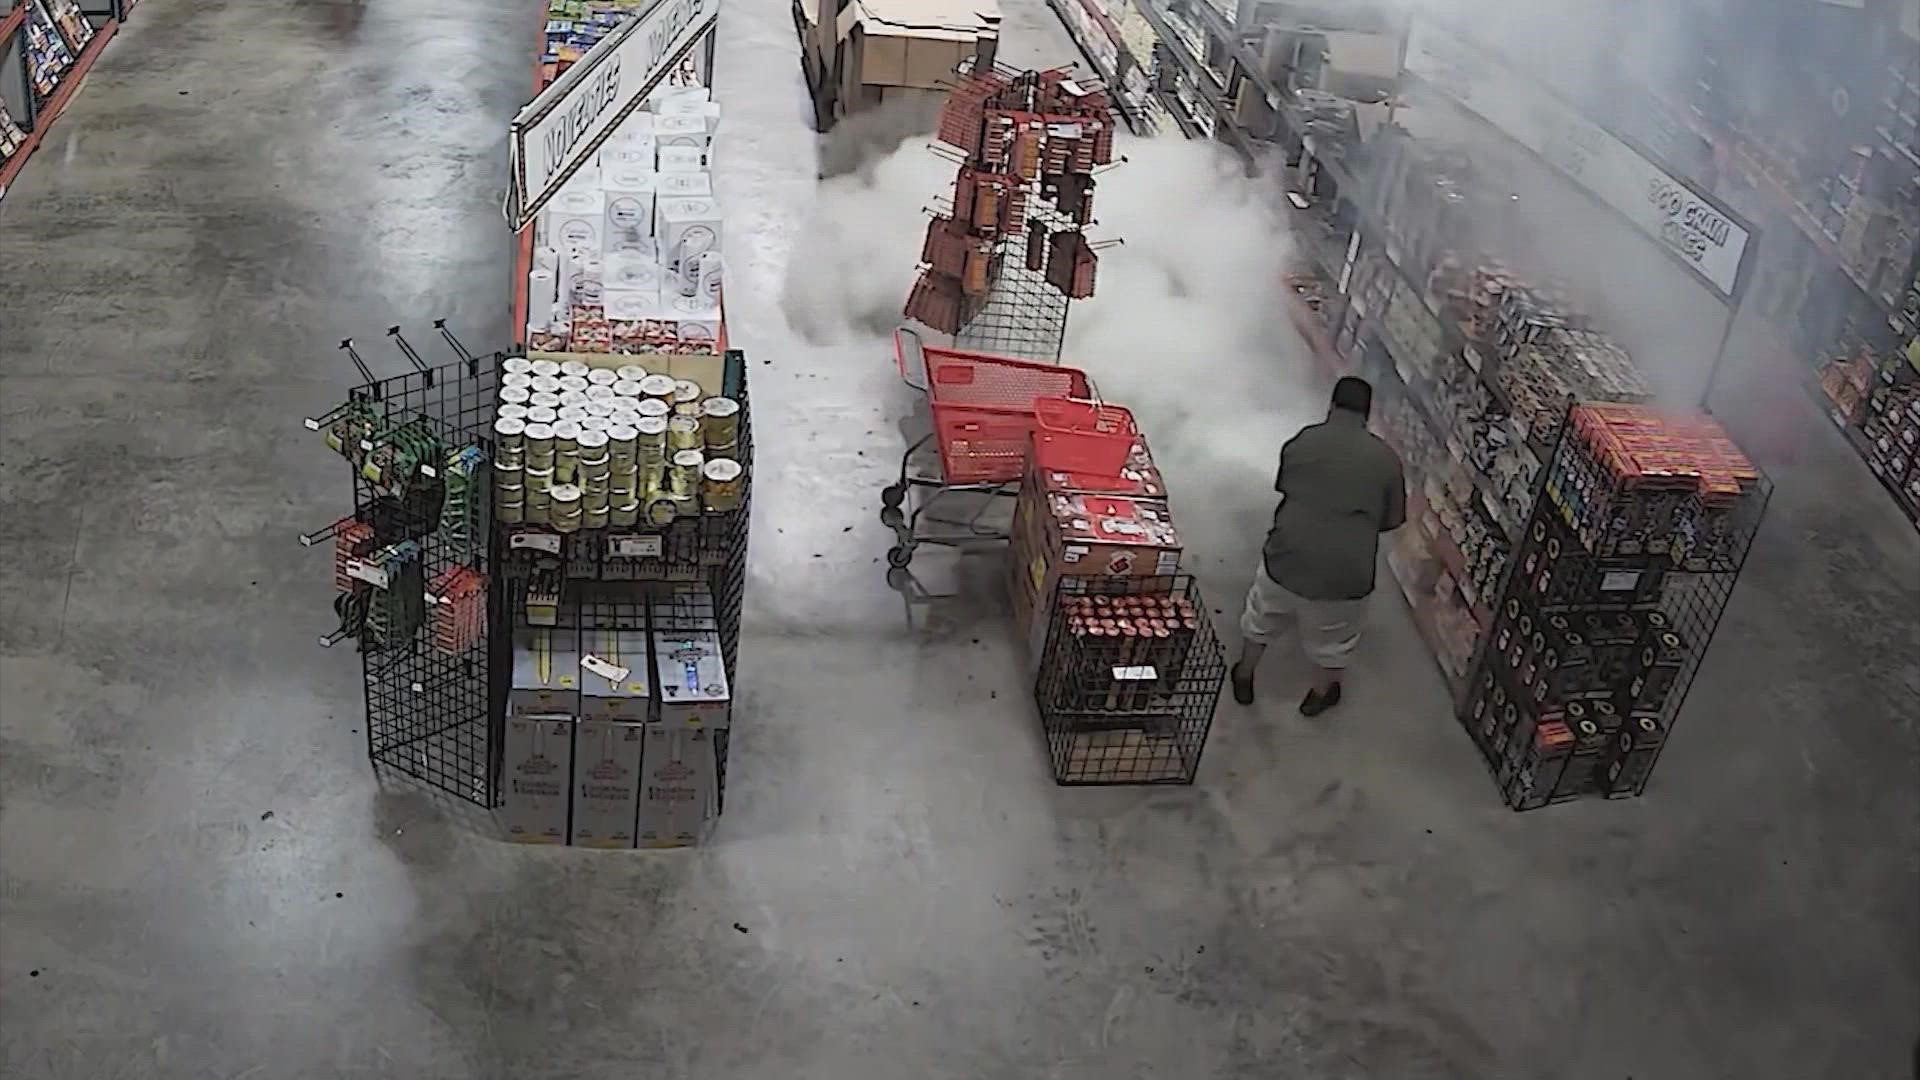 The search is on for three men seen on video lighting a firework inside a fireworks warehouse and then stealing $200 worth of products during the evacuation.